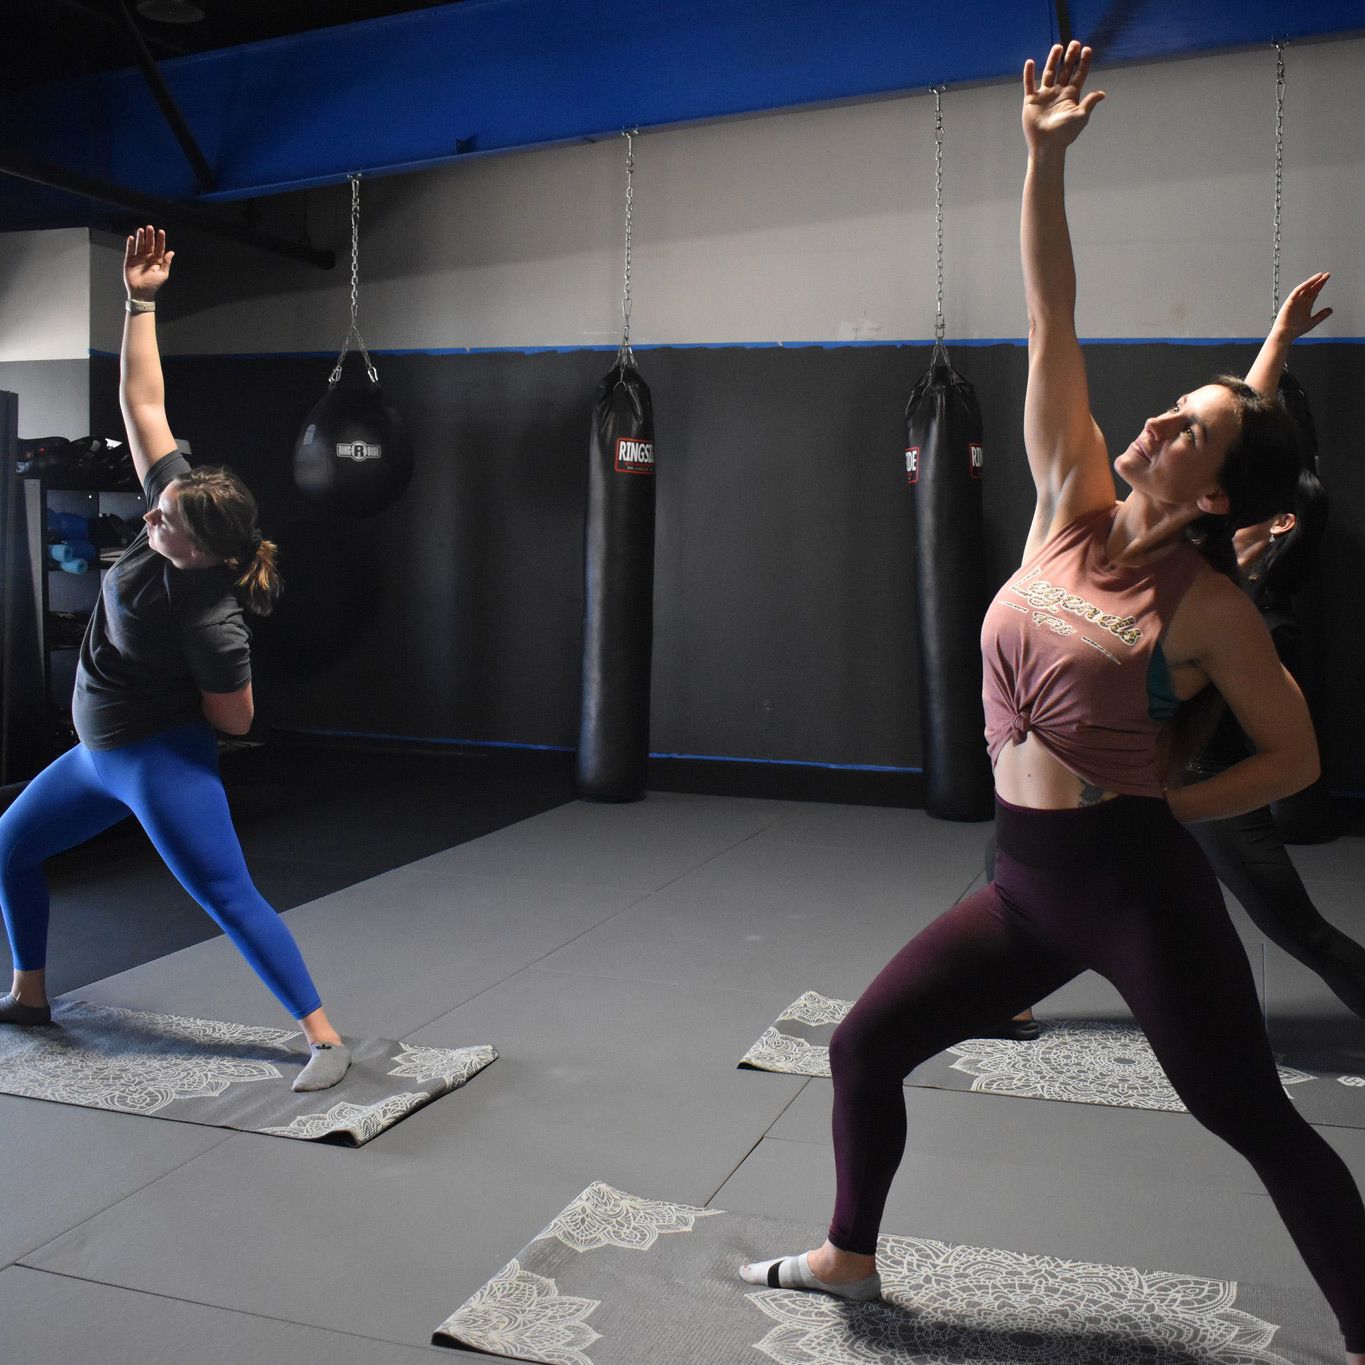 A group of women are practicing yoga in a gym